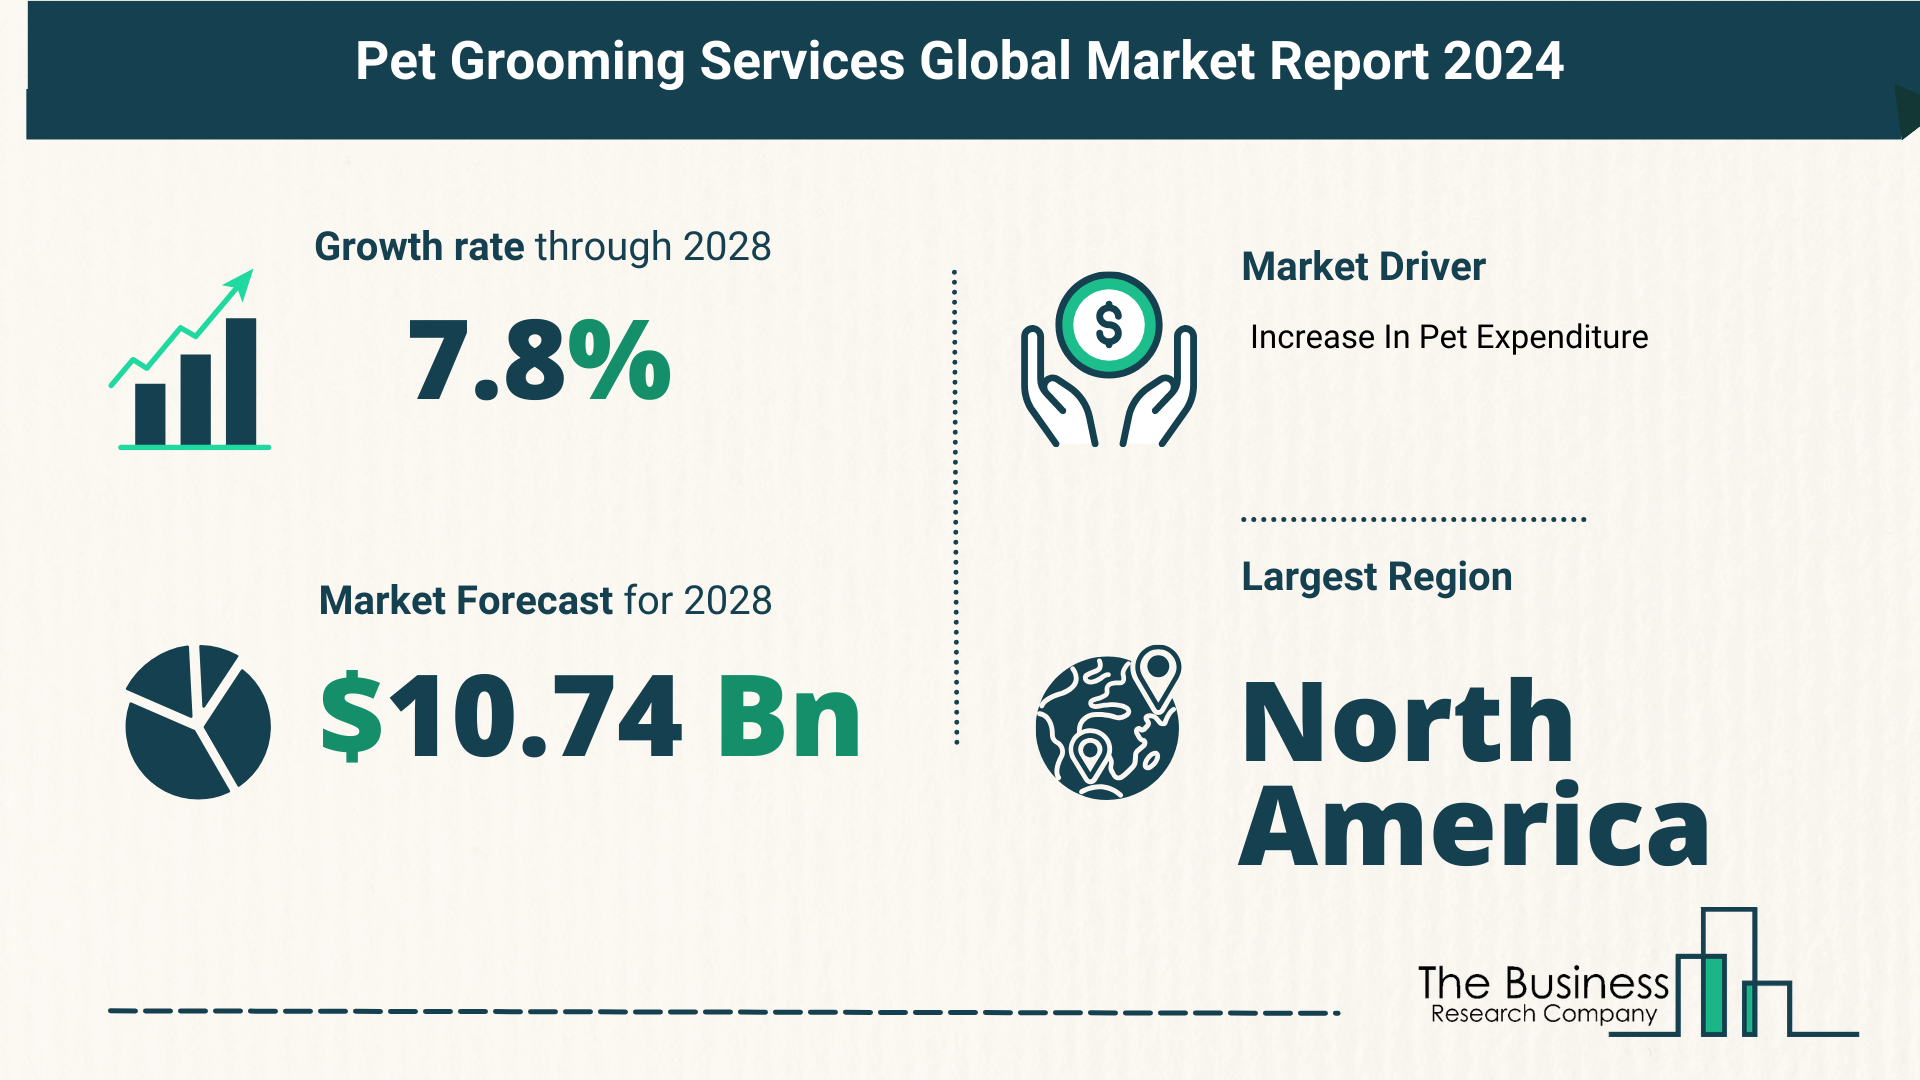 Pet Grooming Services Market Forecast 2024: Forecast Market Size, Drivers And Key Segments